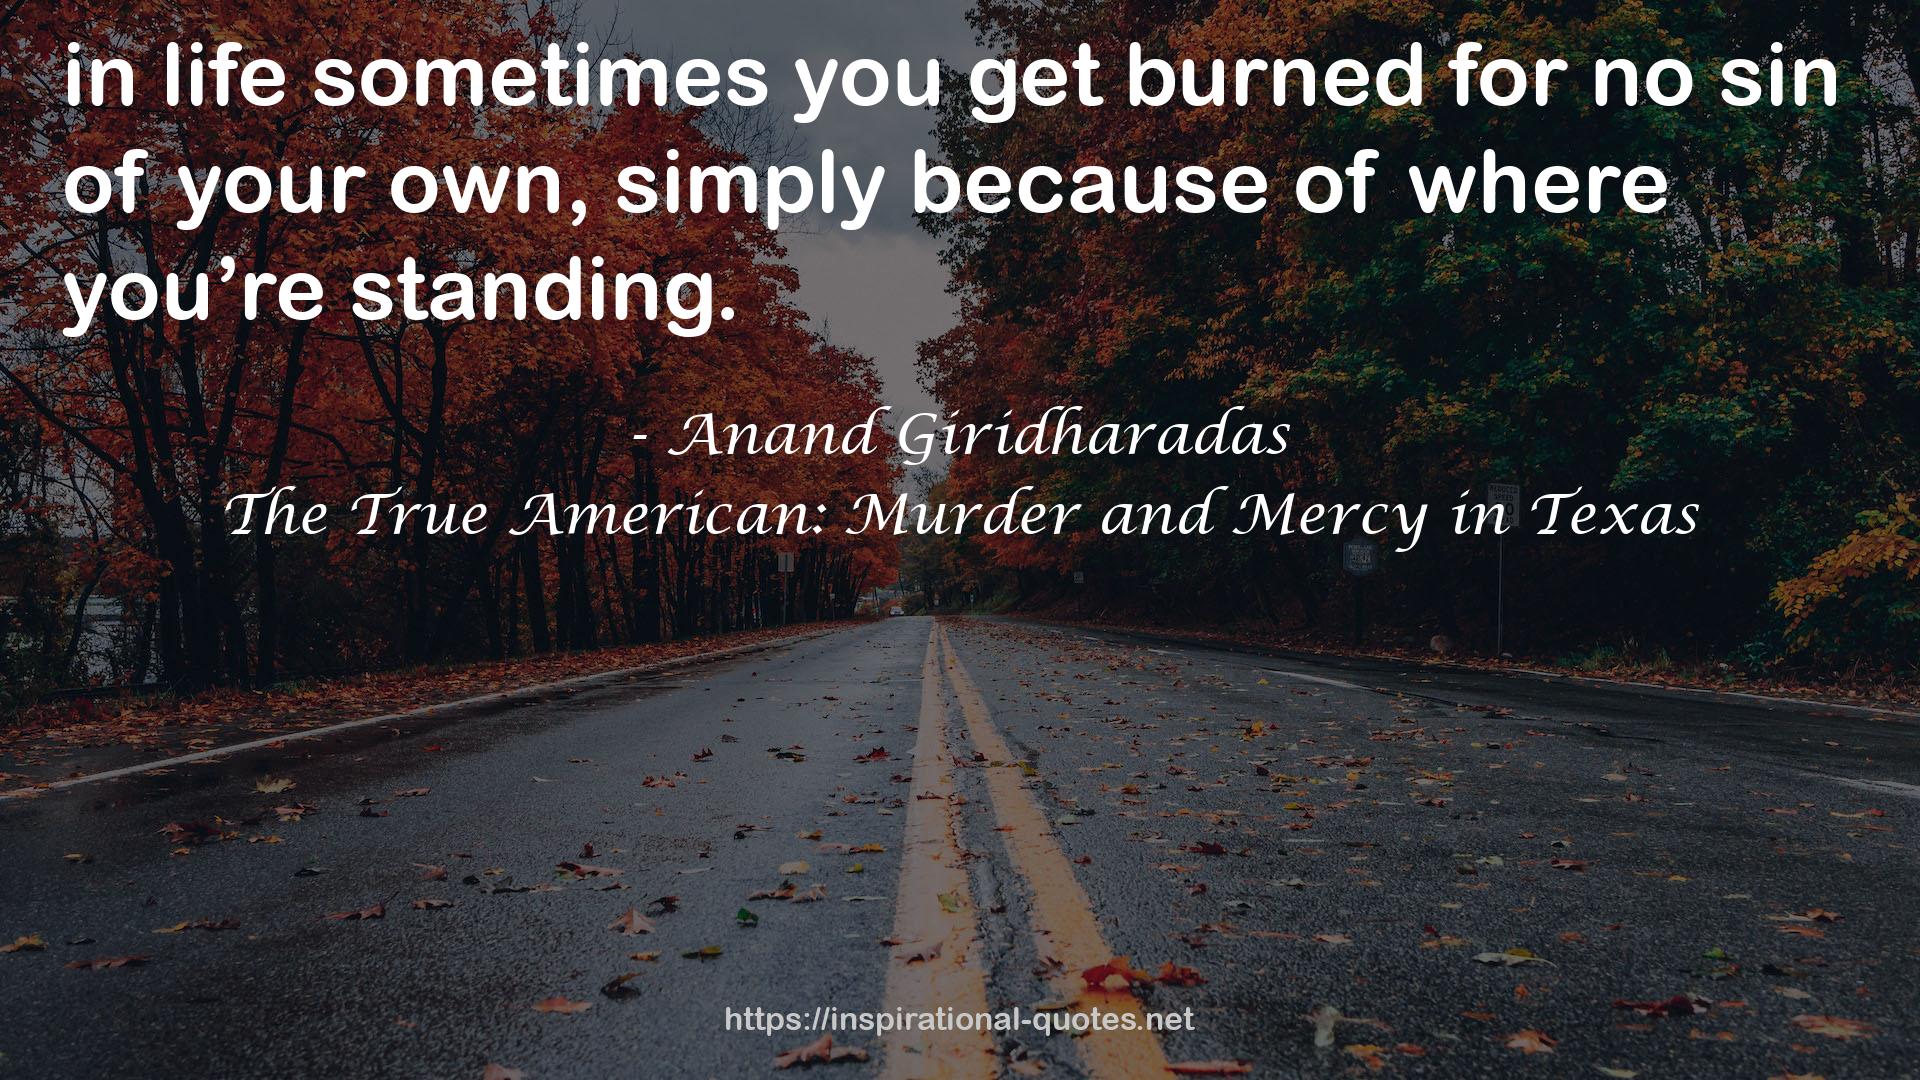 The True American: Murder and Mercy in Texas QUOTES